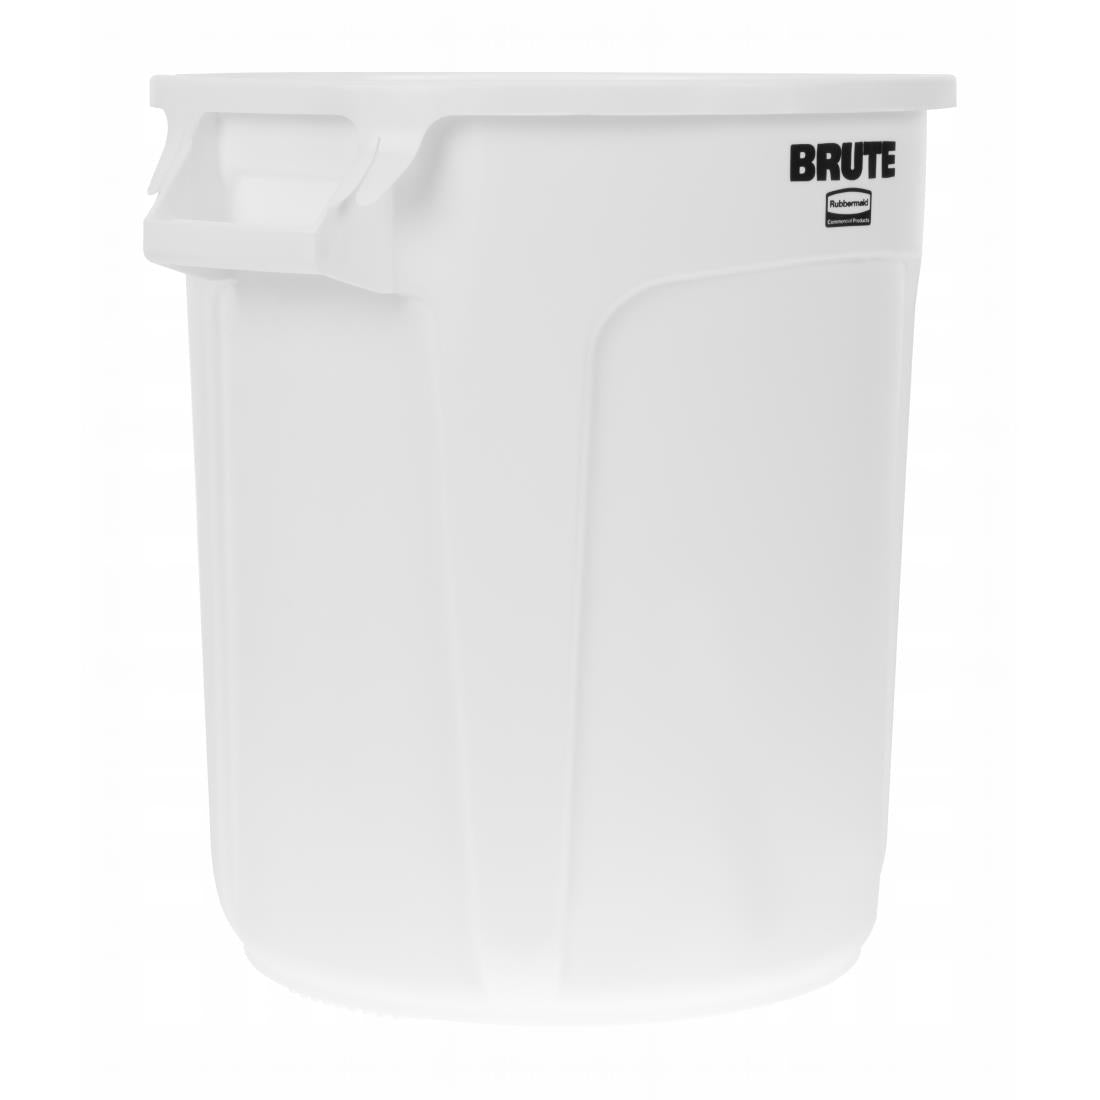 L651 Rubbermaid Round Brute Container 37.9Ltr